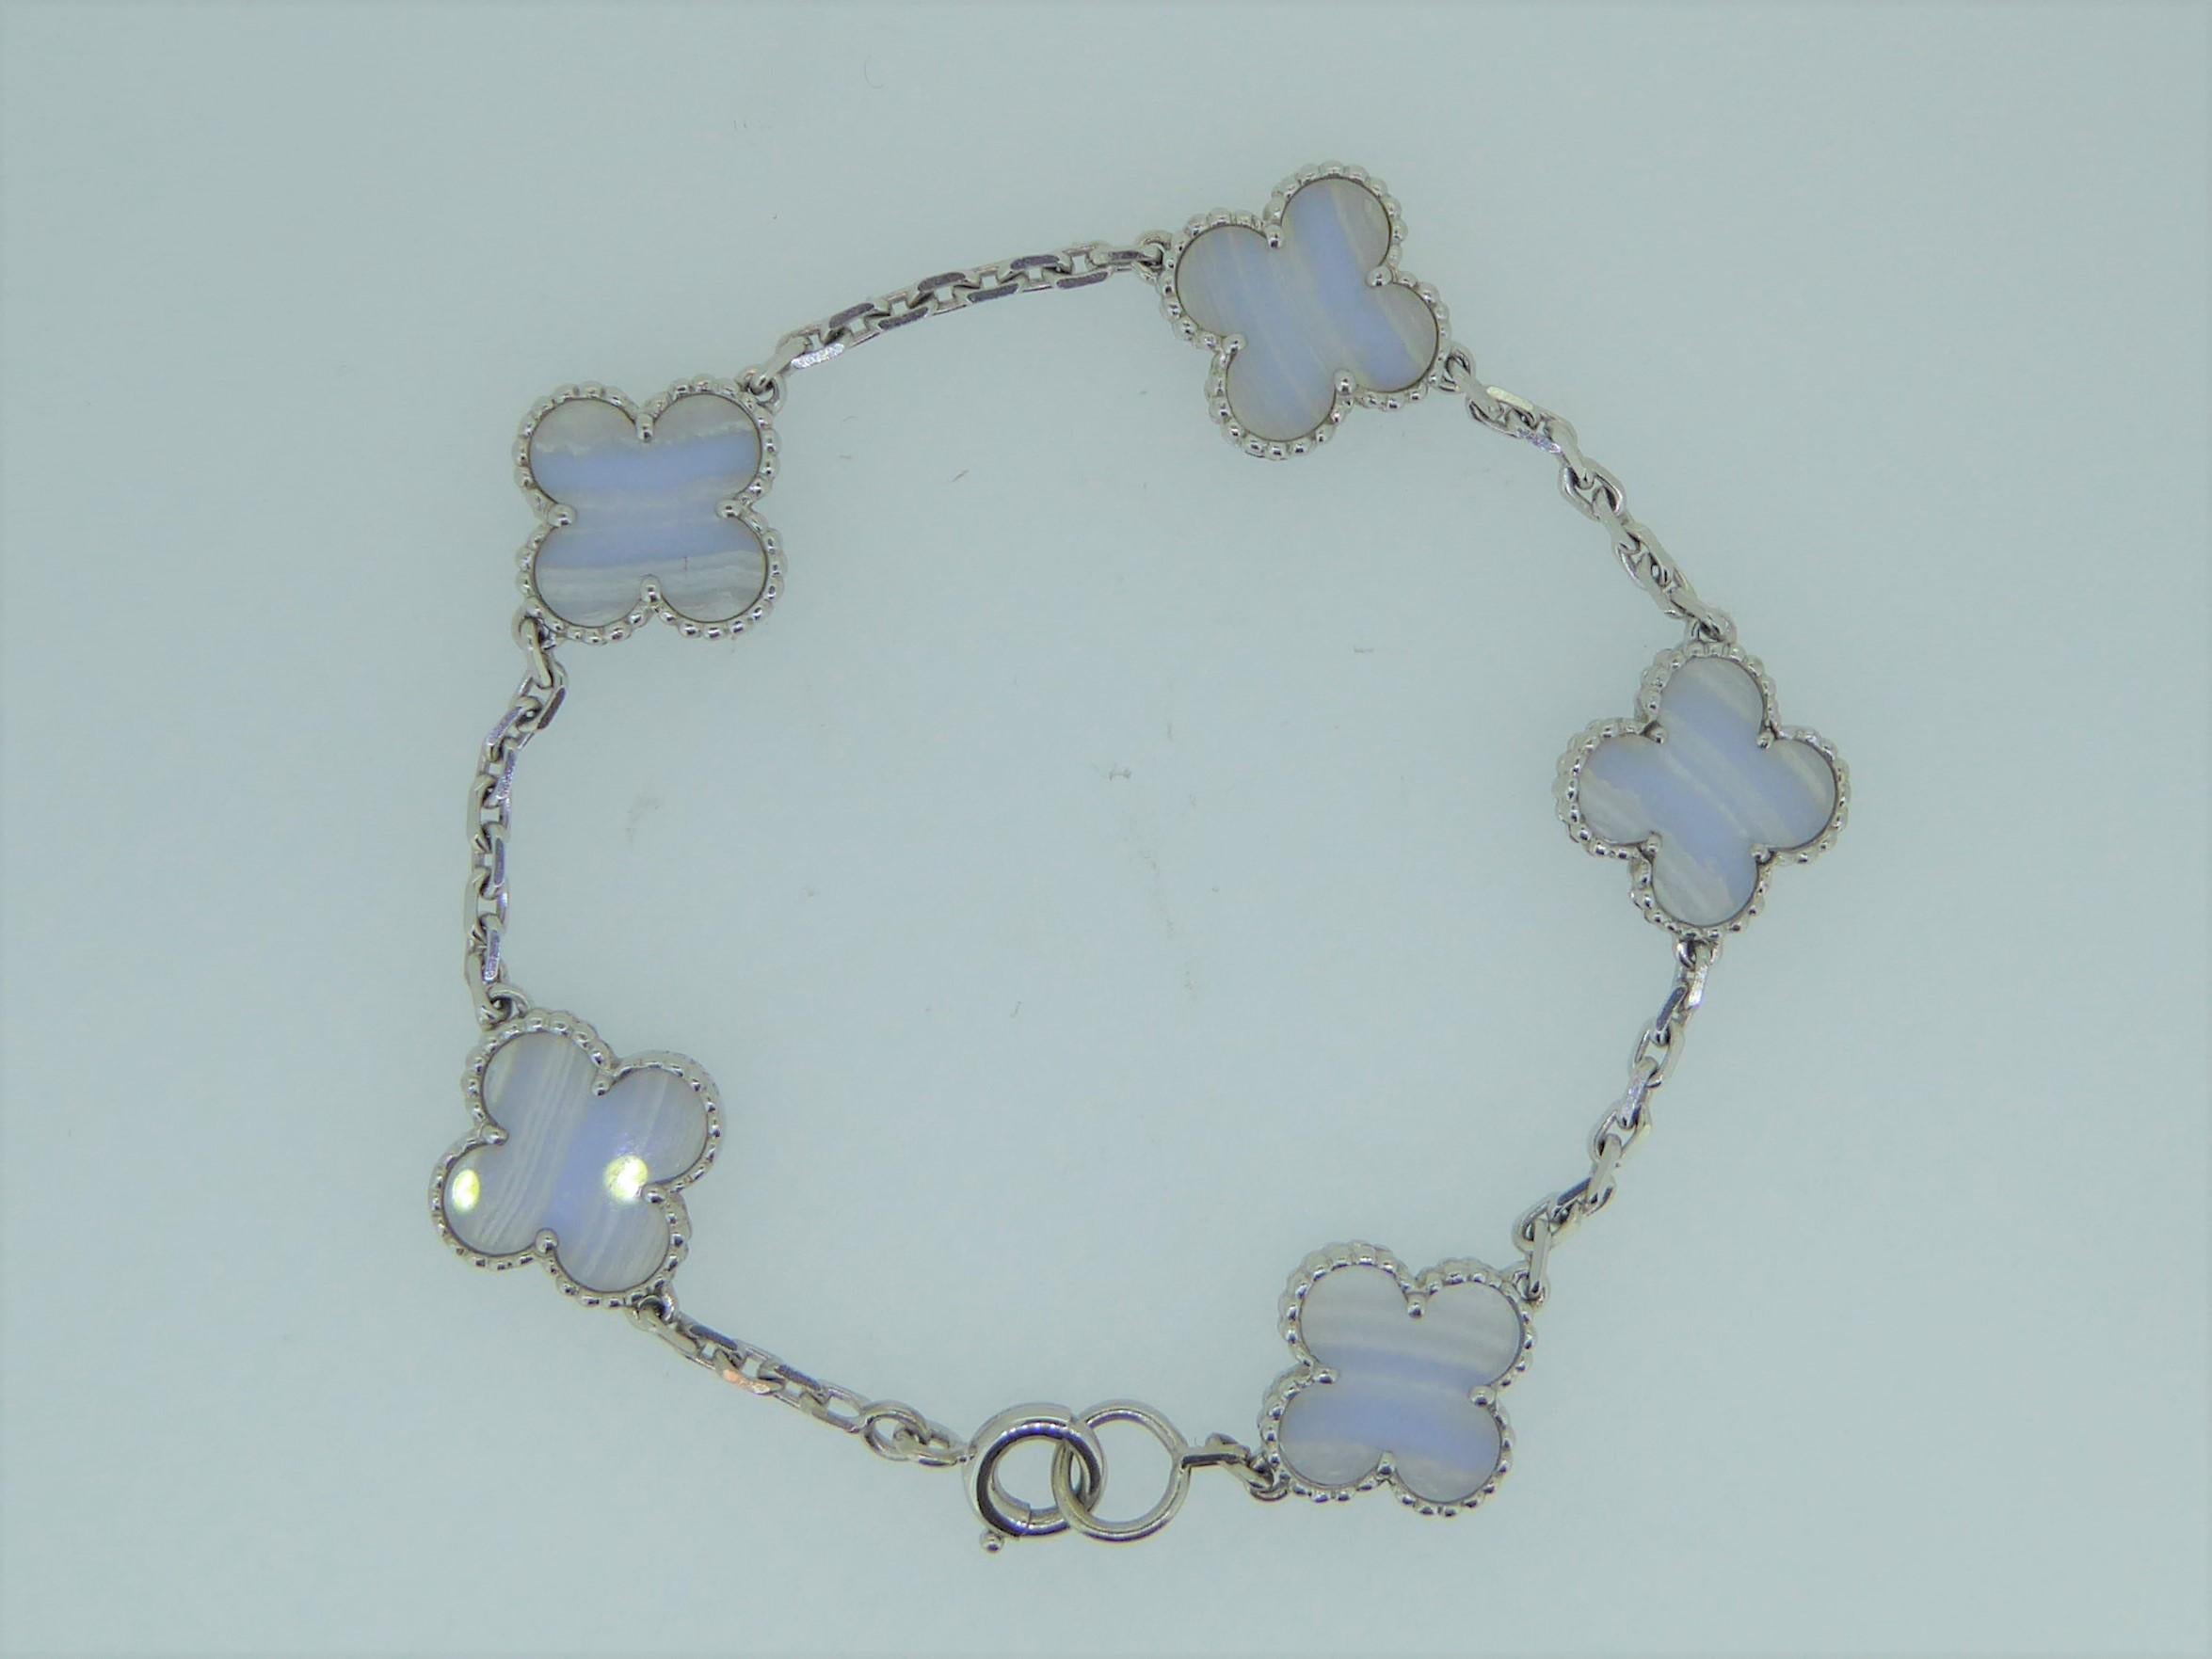 A Van Cleef and Arpels Alhambra chalcedony 18ct white gold bracelet. With 5 motifs of chalcedony stones approximately 1.4cm each. Marked 